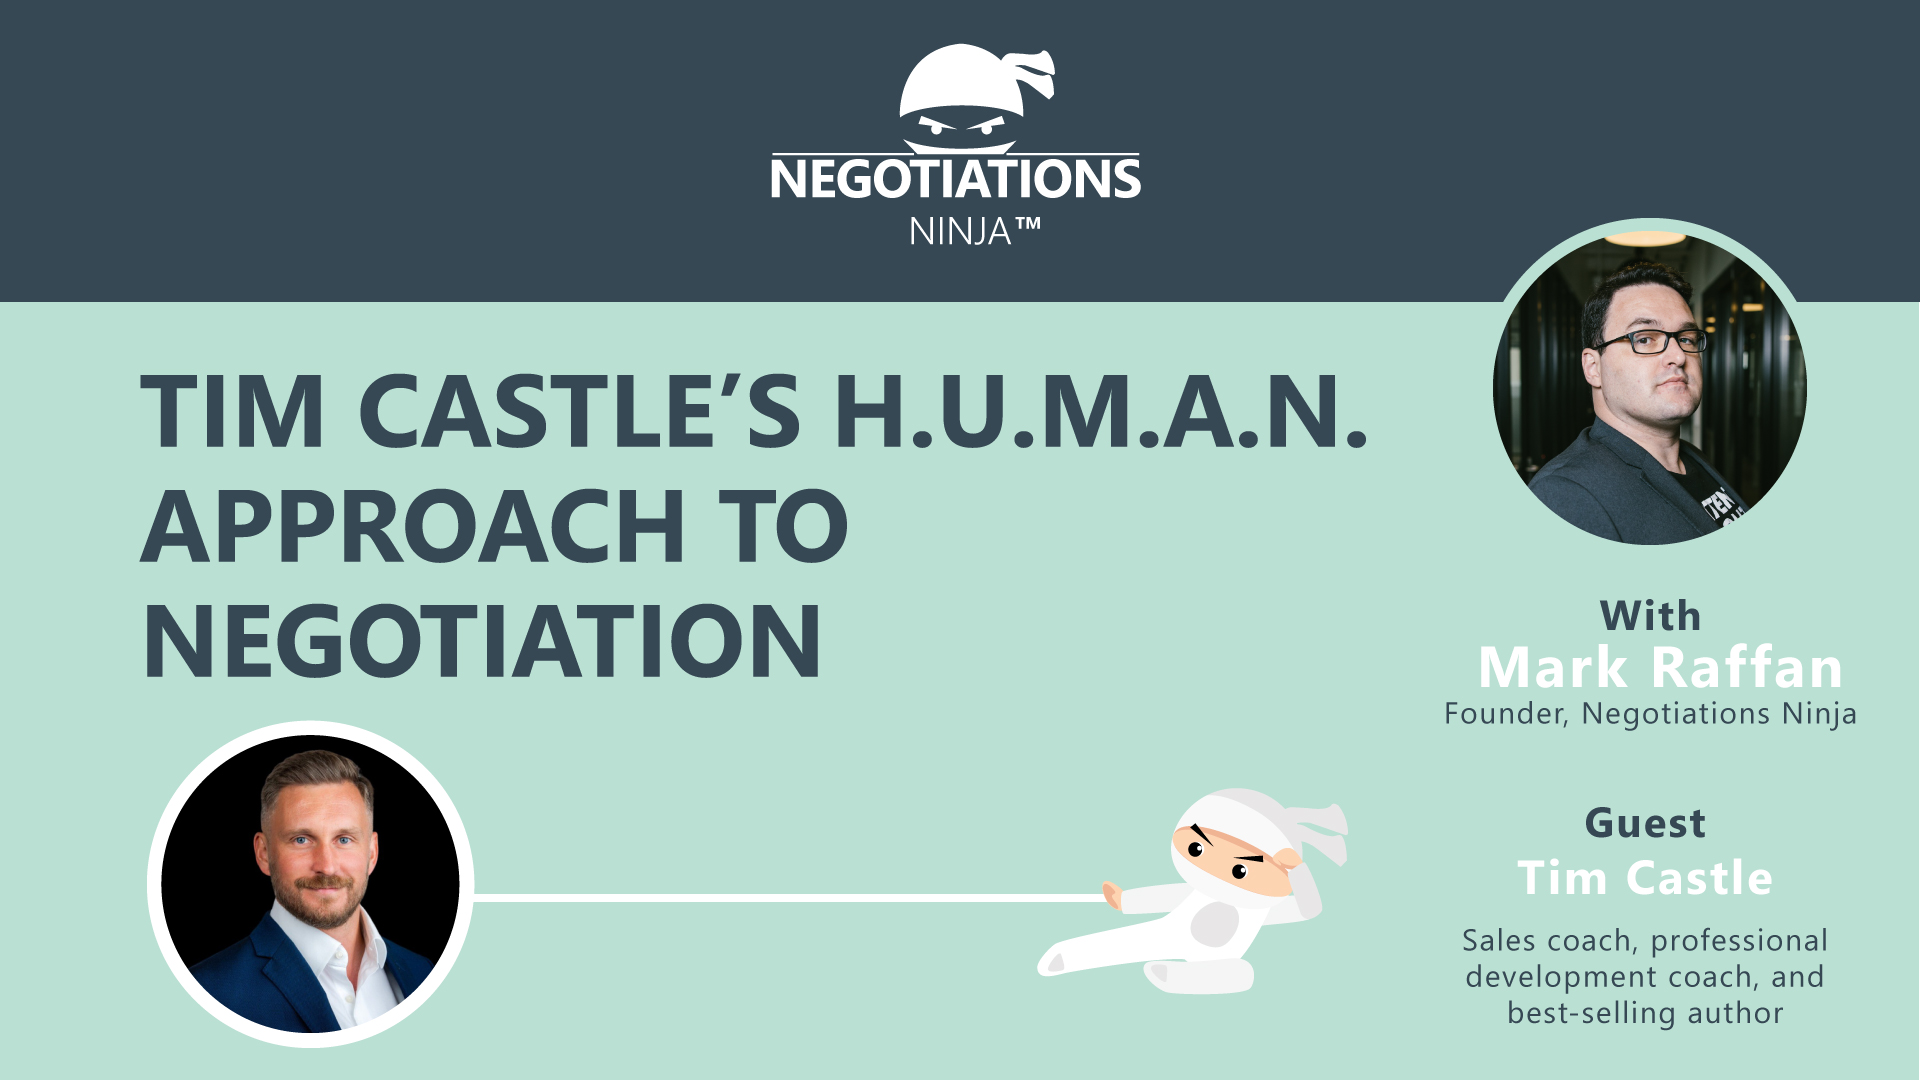 Tim Castle’s H.U.M.A.N. Approach to Negotiation